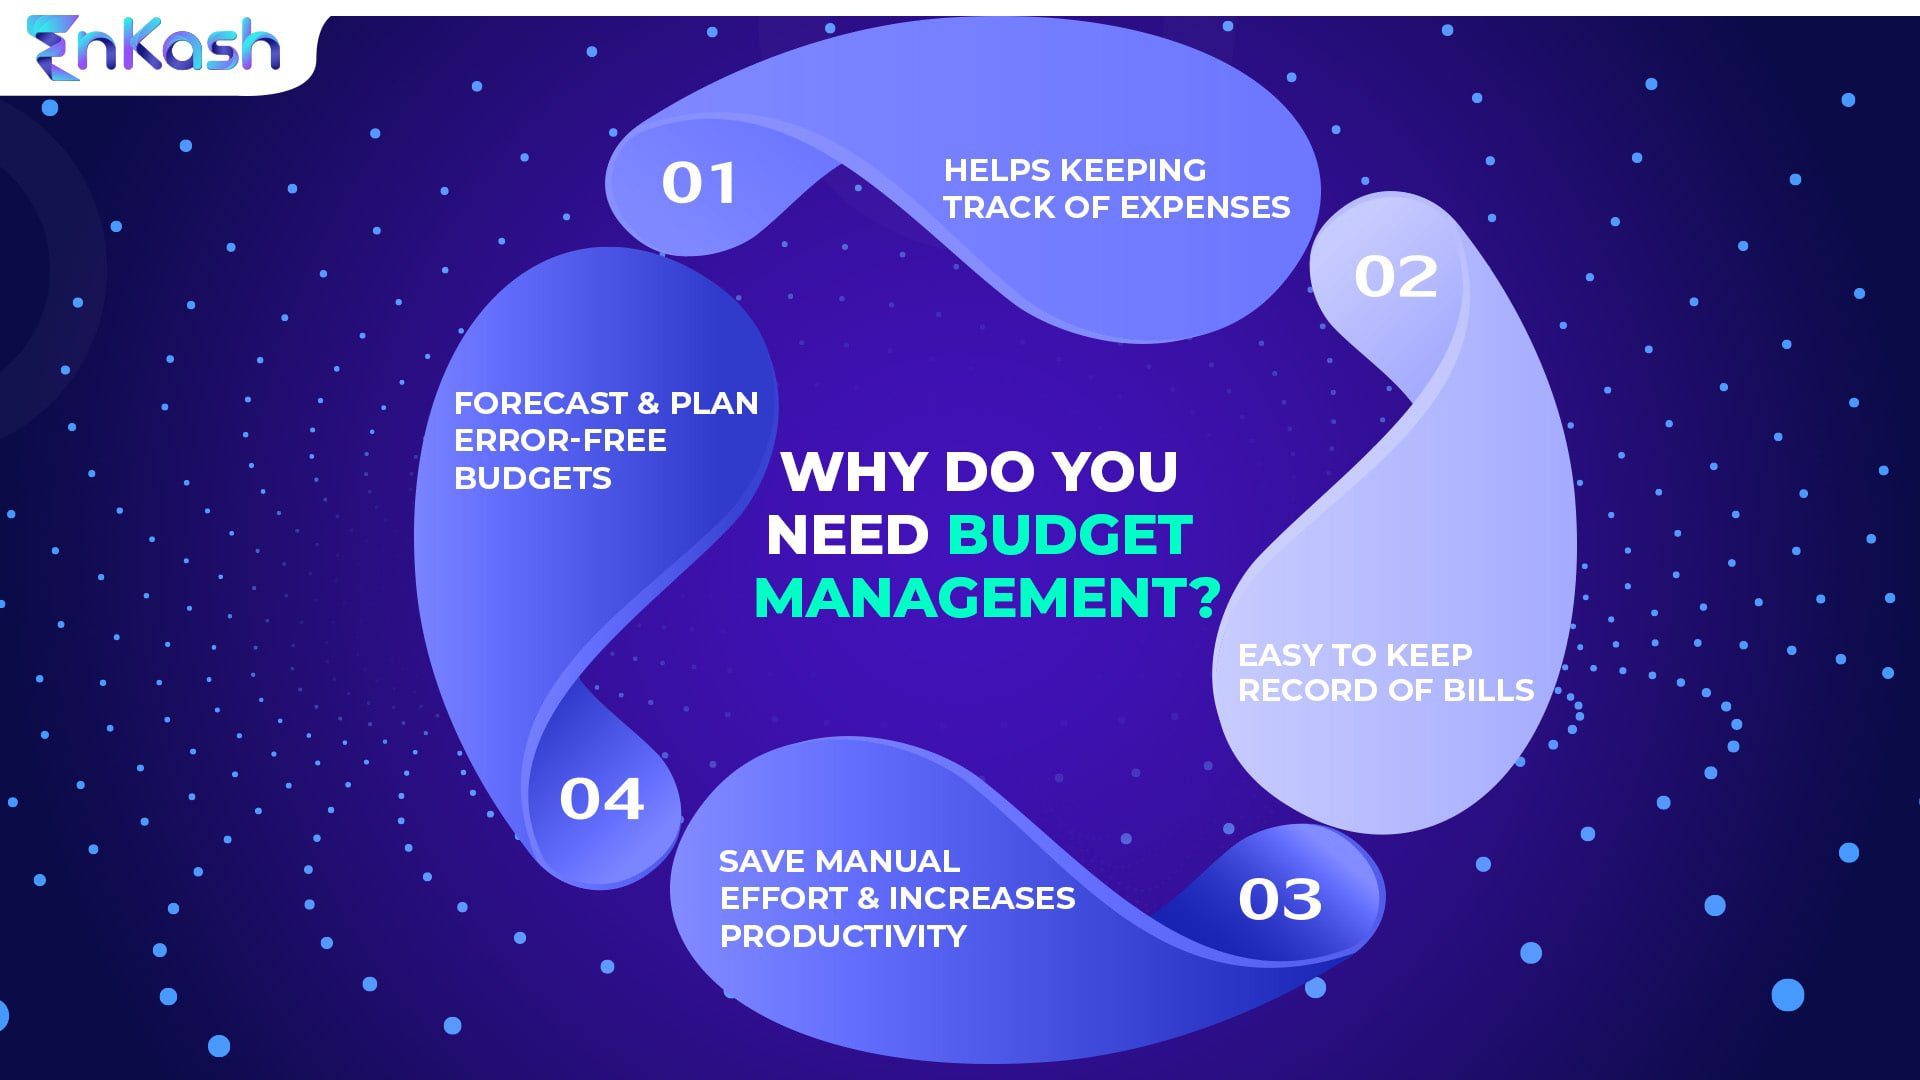 Why do you need budget management